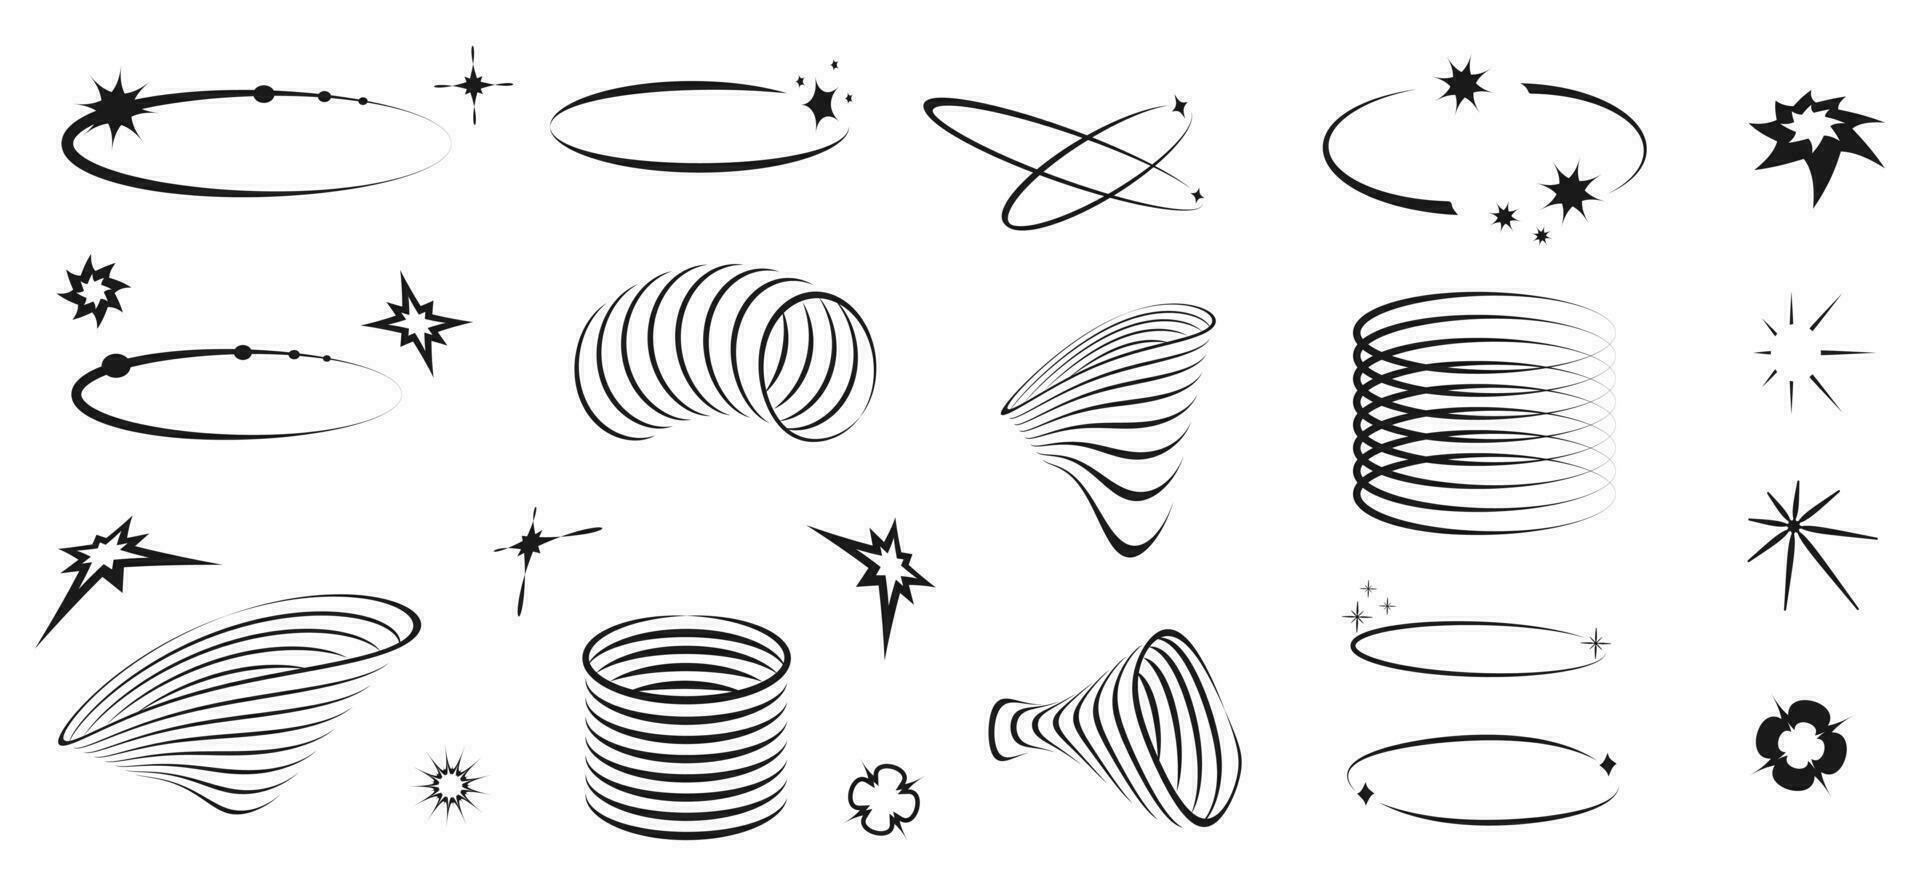 Y2k graphic elements. Vector illustration of set of retro icons for design in the style of 90-x. Geometric black linear abstract shapes